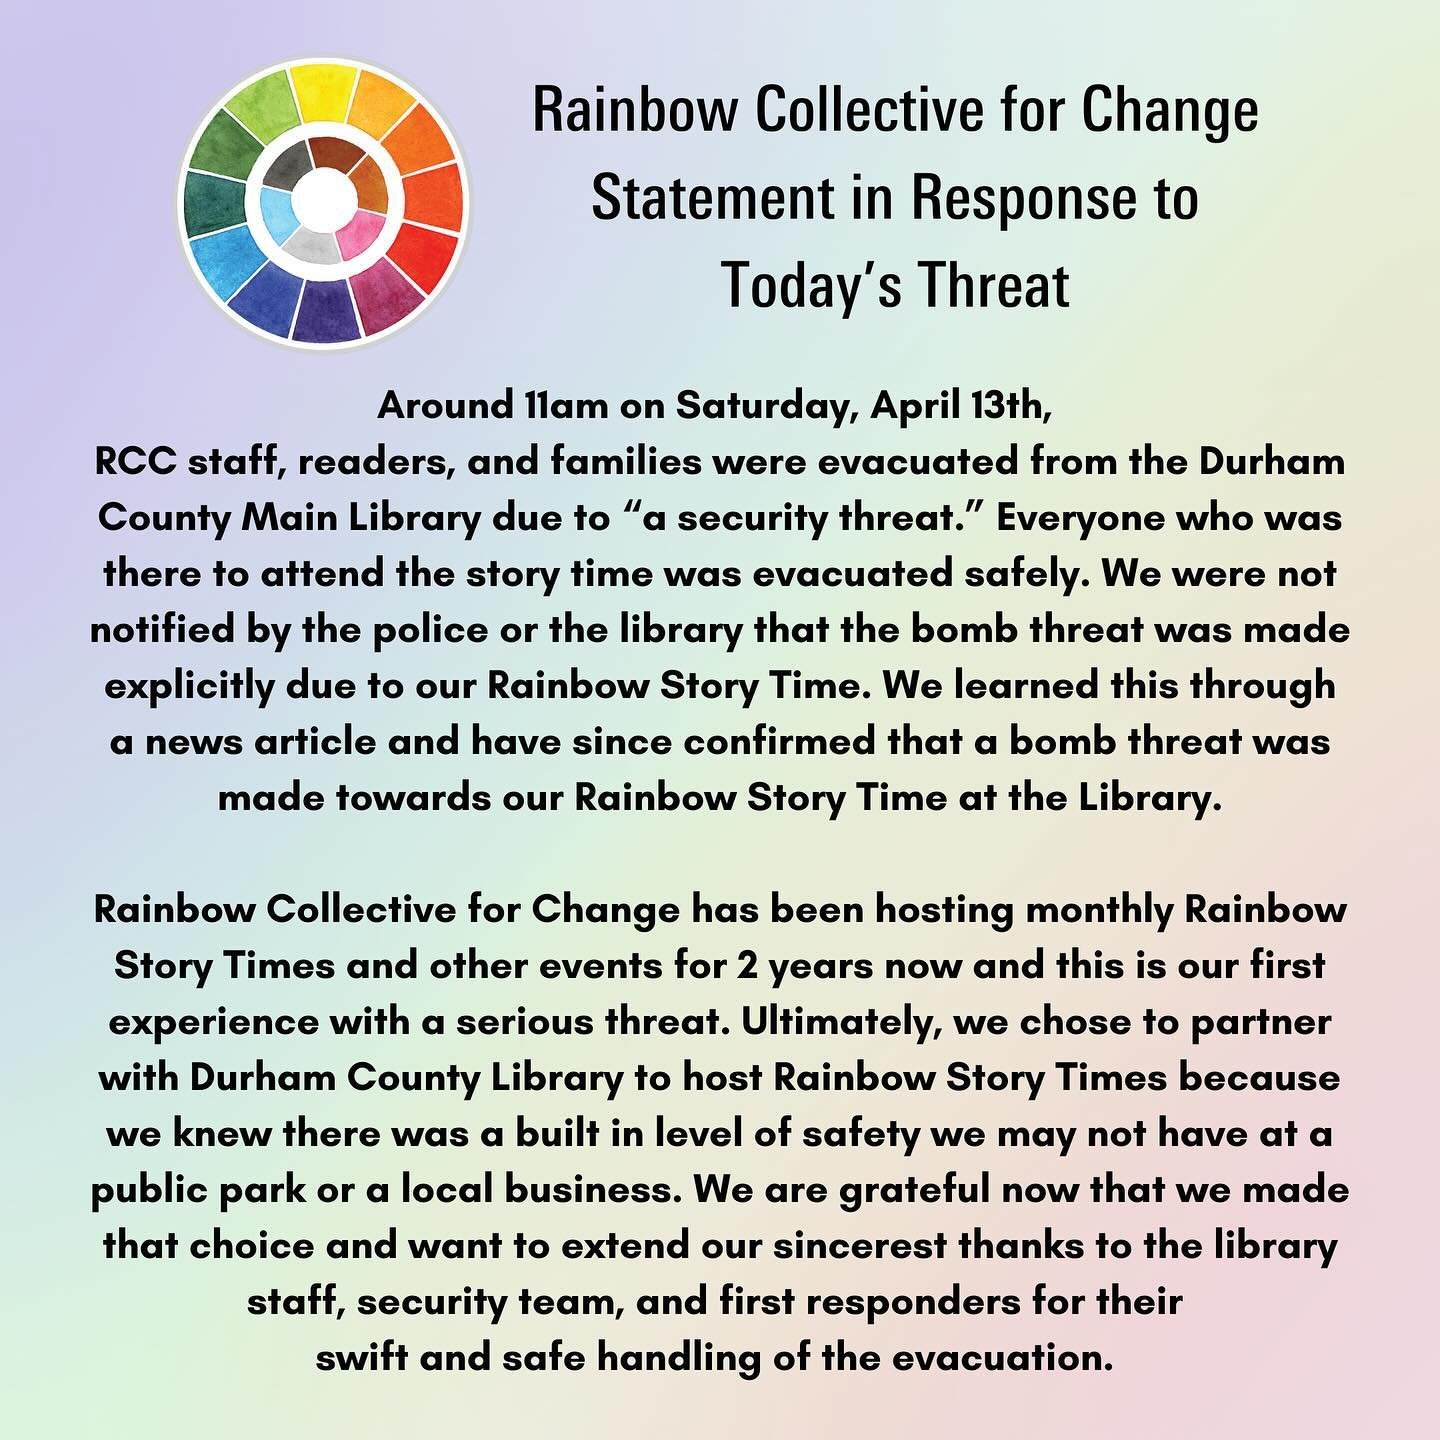 Unfortunately, we don&rsquo;t anticipate this being the end of threats of violence towards our organization and our LGBTQIA+ community. Nationwide, LGBTQIA+ youth, LGBTQIA+ and anti-racist organizations, and libraries are under attack. Black transgen